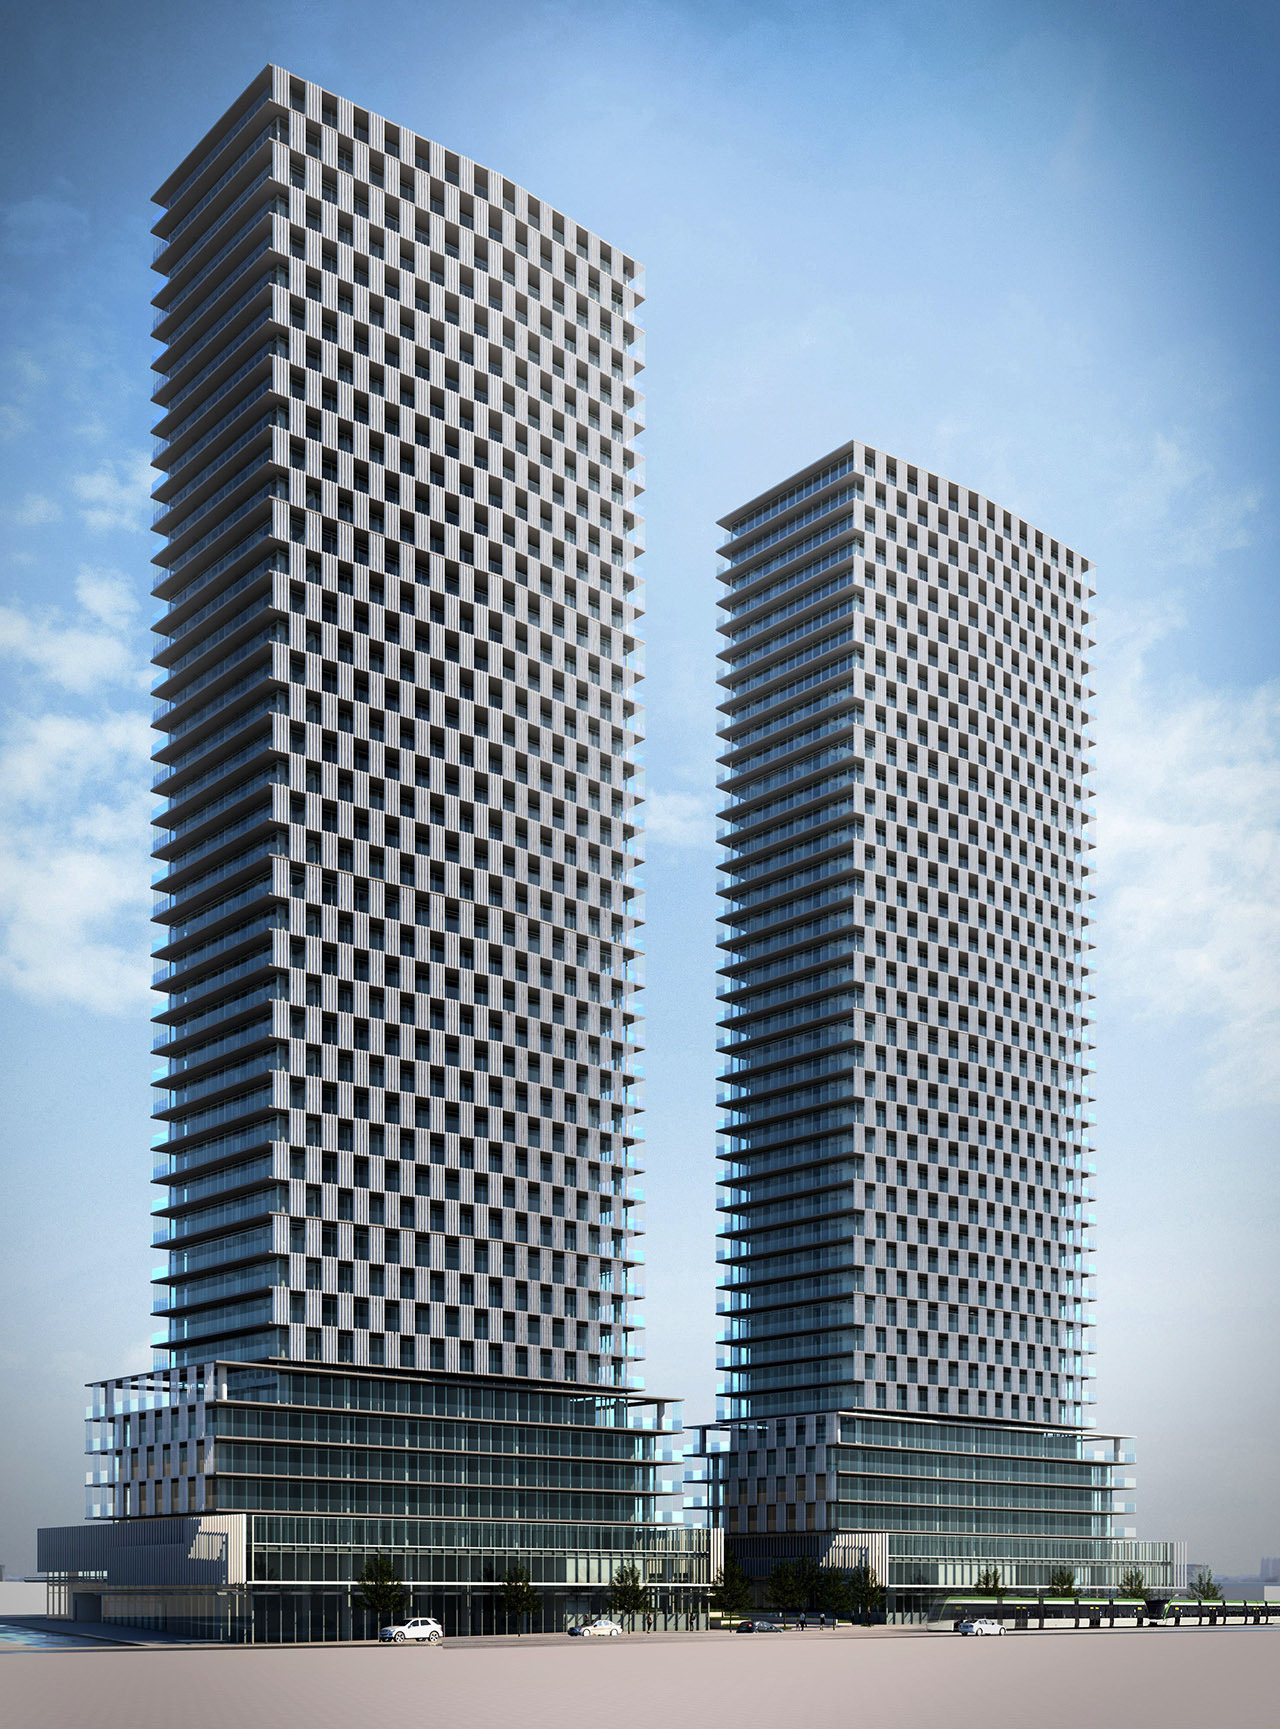 1900 Eglinton East, Toronto, designed by architects—Alliance for SmartCentres REIT